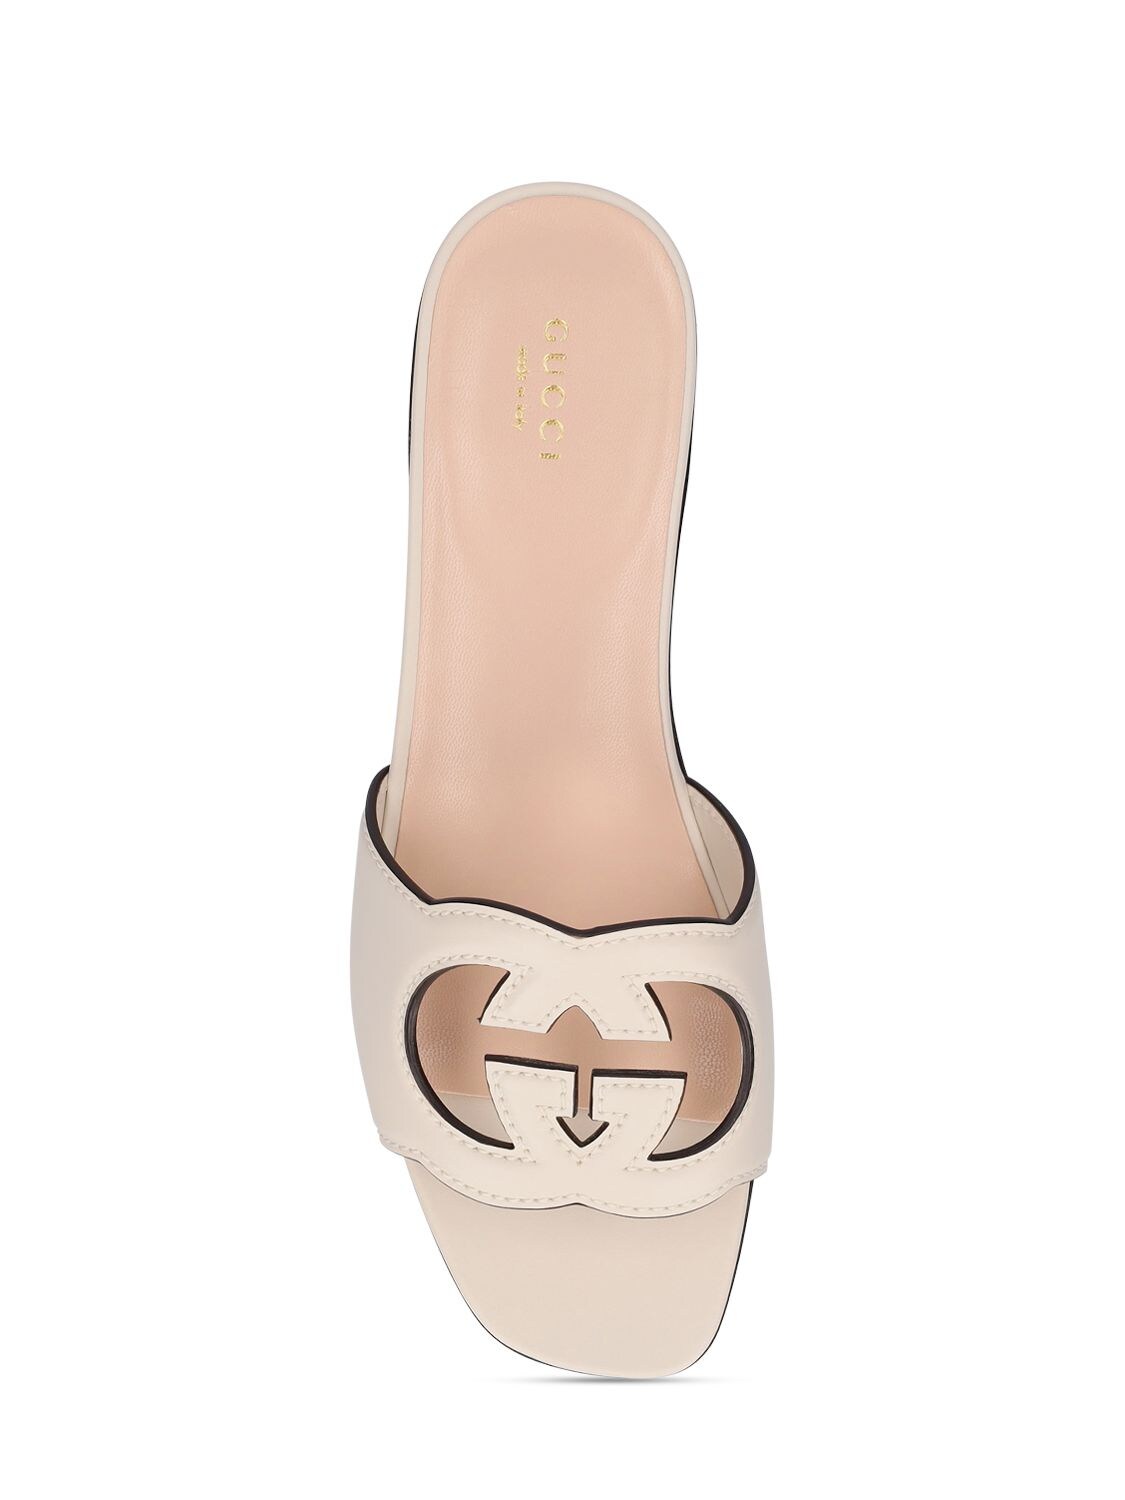 Shop Gucci 20mm Gg Cutout Leather Slide Sandals In Mystic White